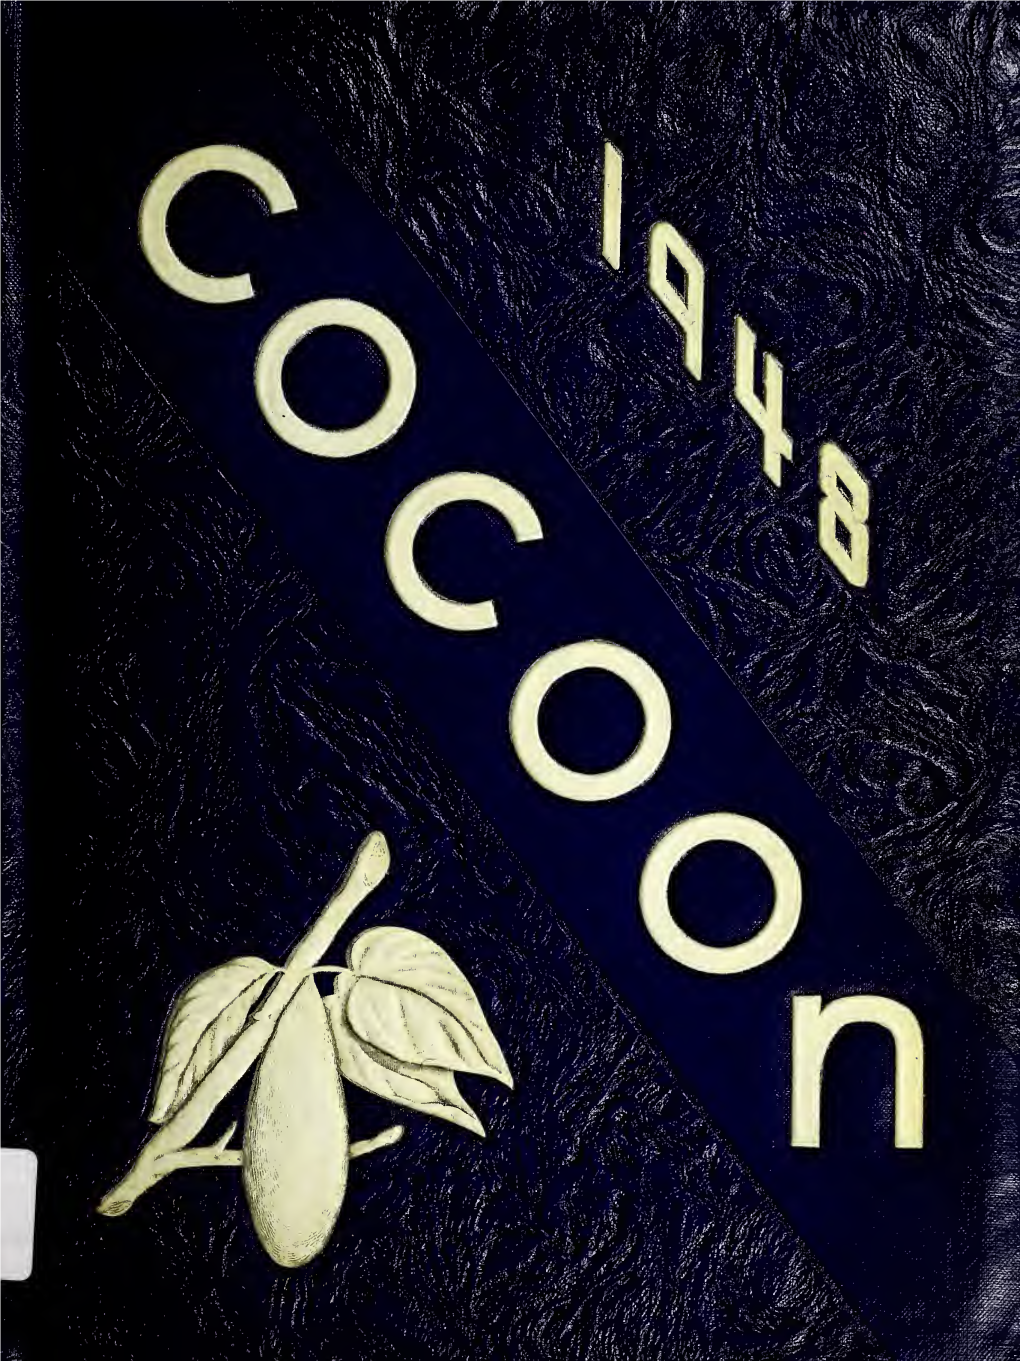 Charles L Coon High School Yearbook, "The Cocoon", 1948